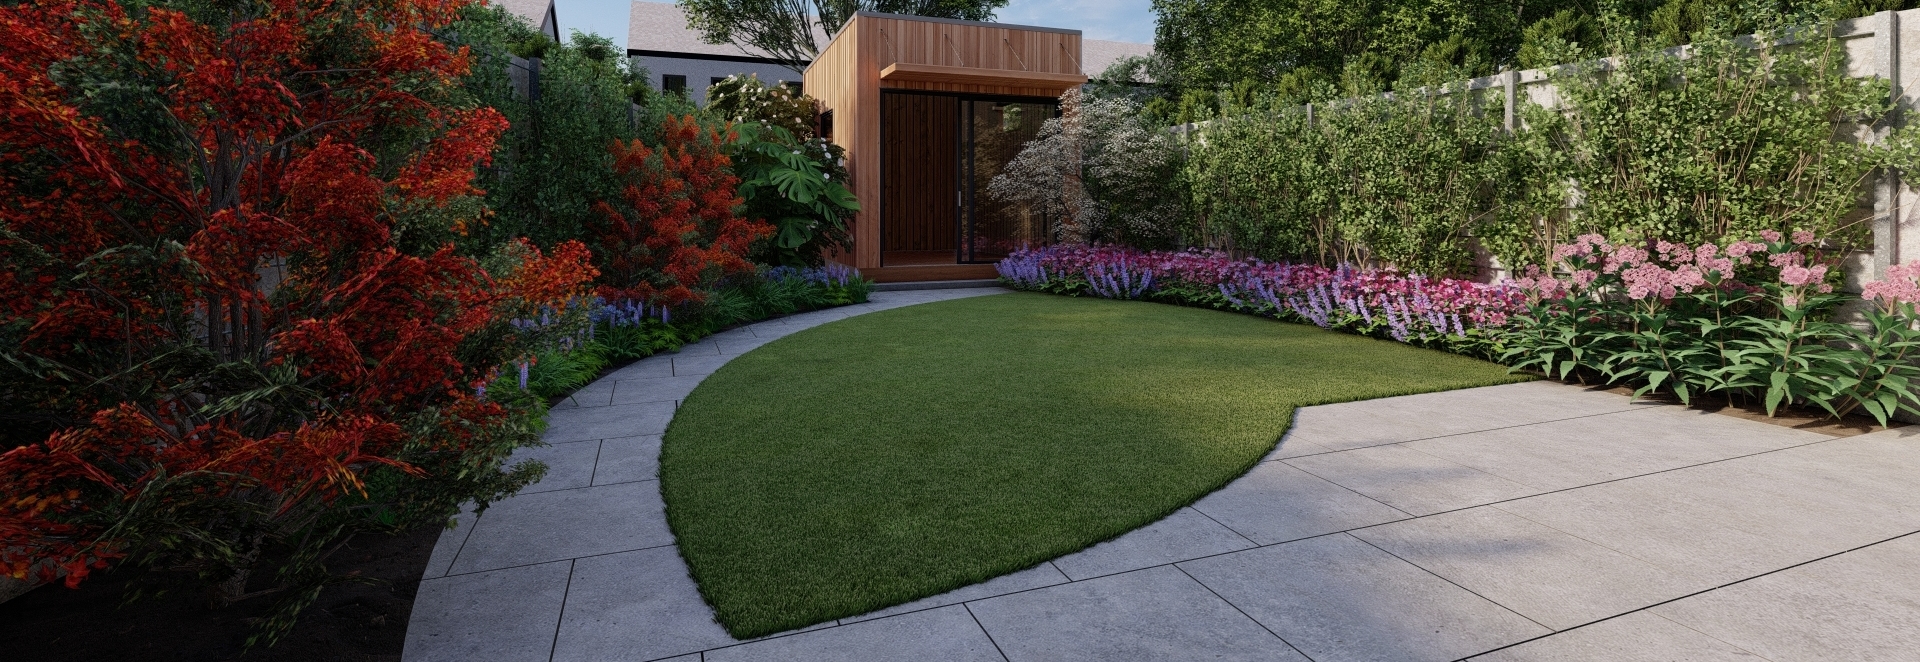 Garden Design in Maynooth, Co Kildare | 3D Design Visuals for small Family Gardens